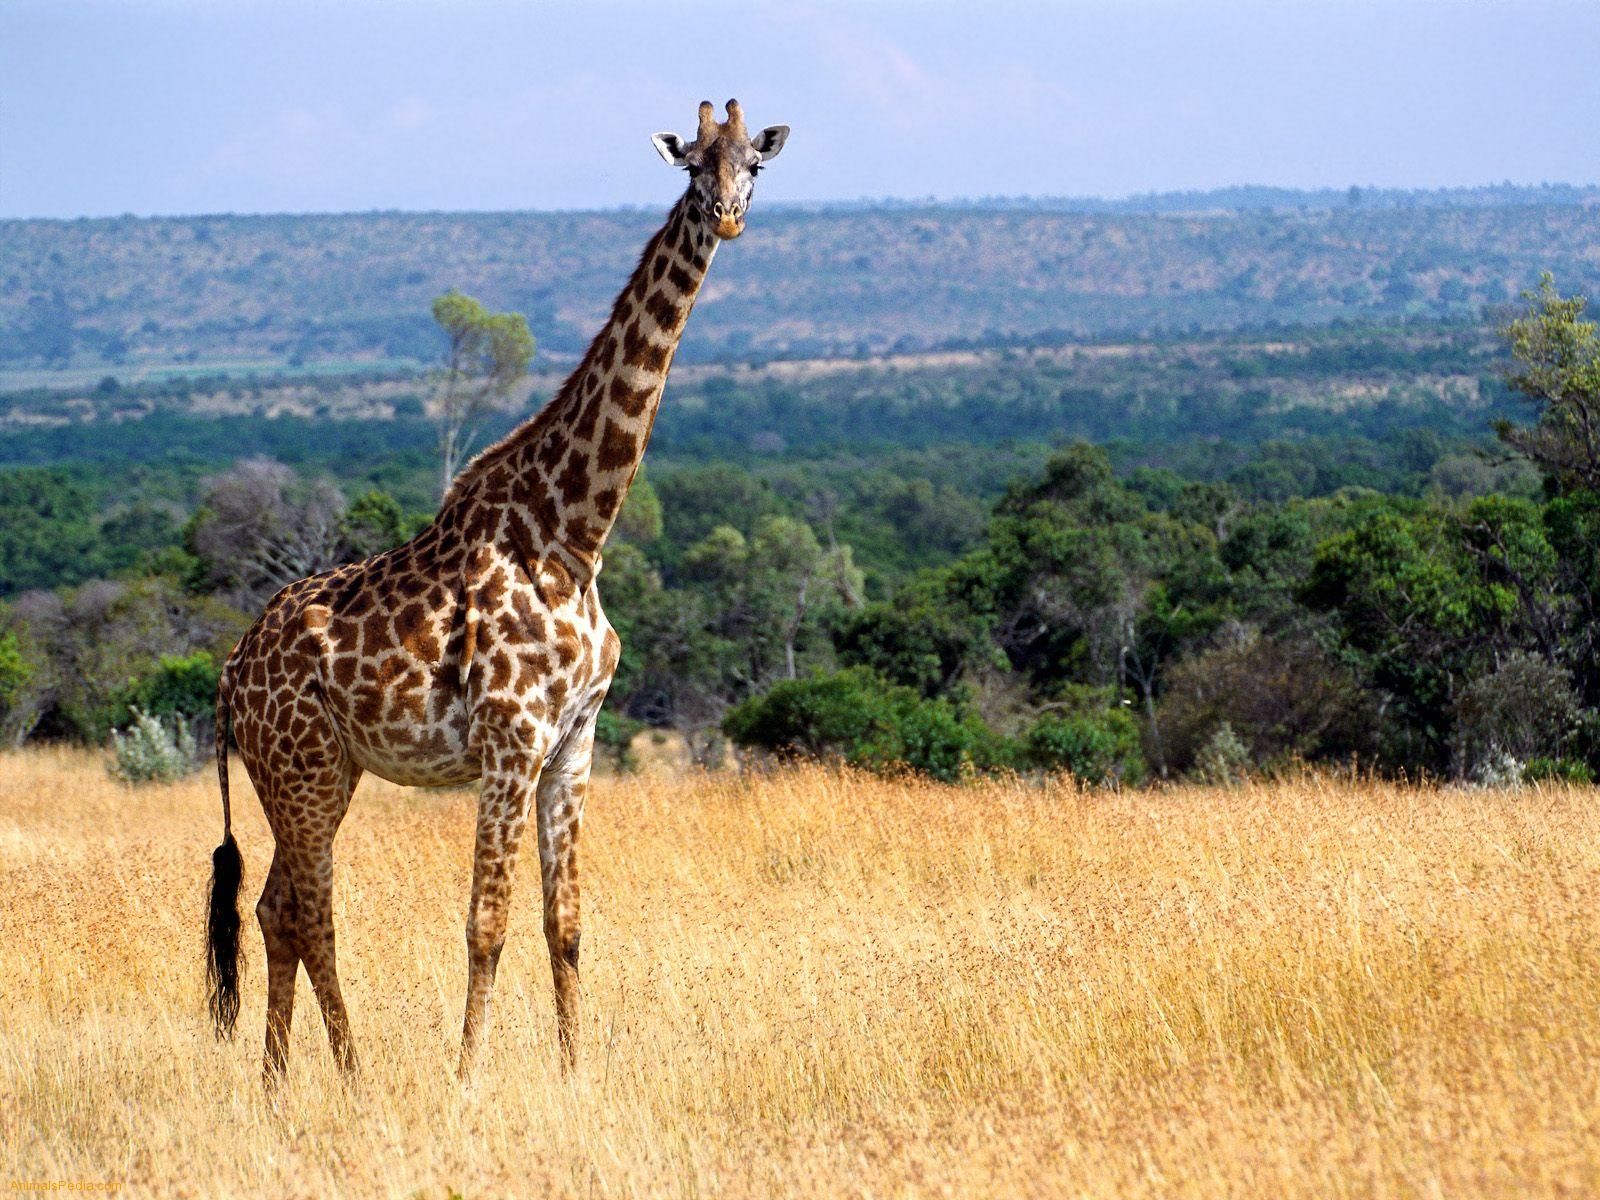 African Giraffes Facts With Images And Video | African Animals ...